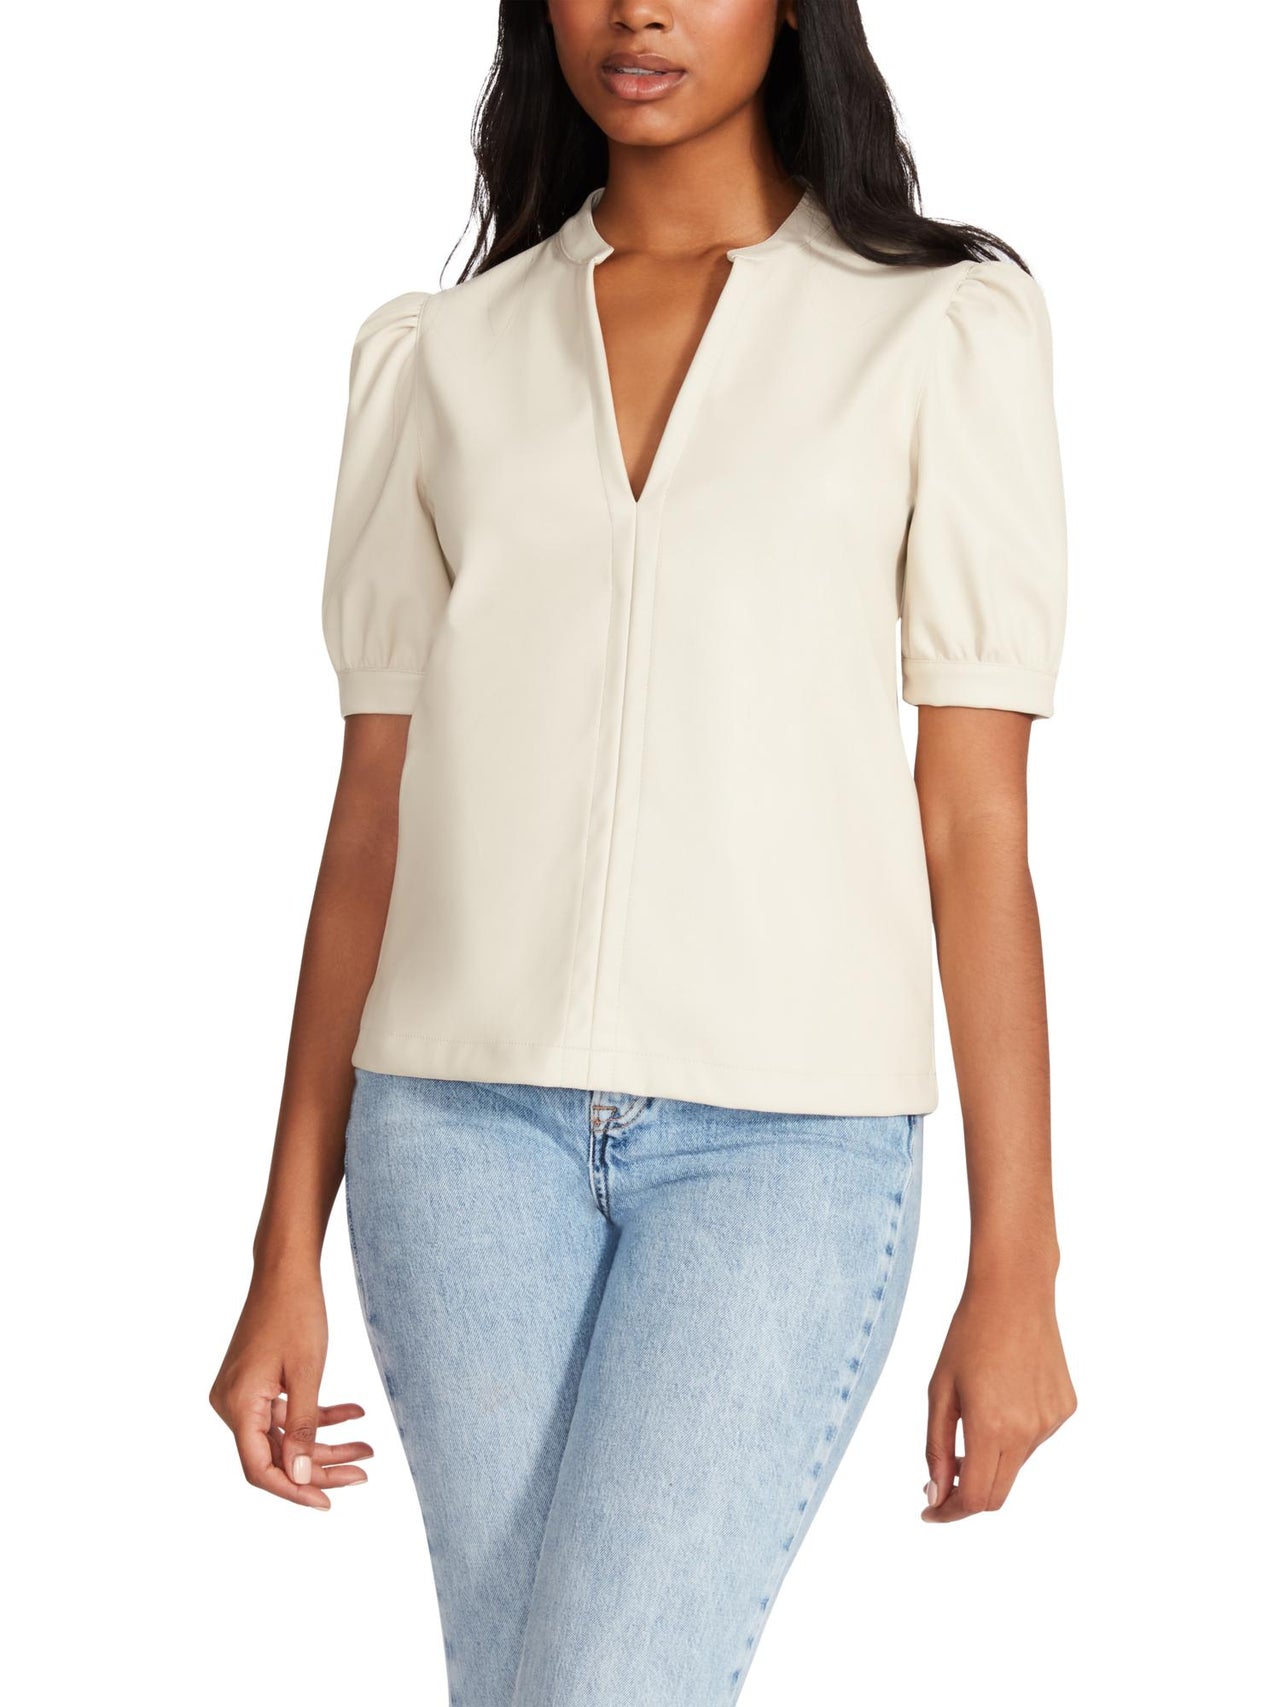 Jane Top, Top by Steve Madden | LIT Boutique